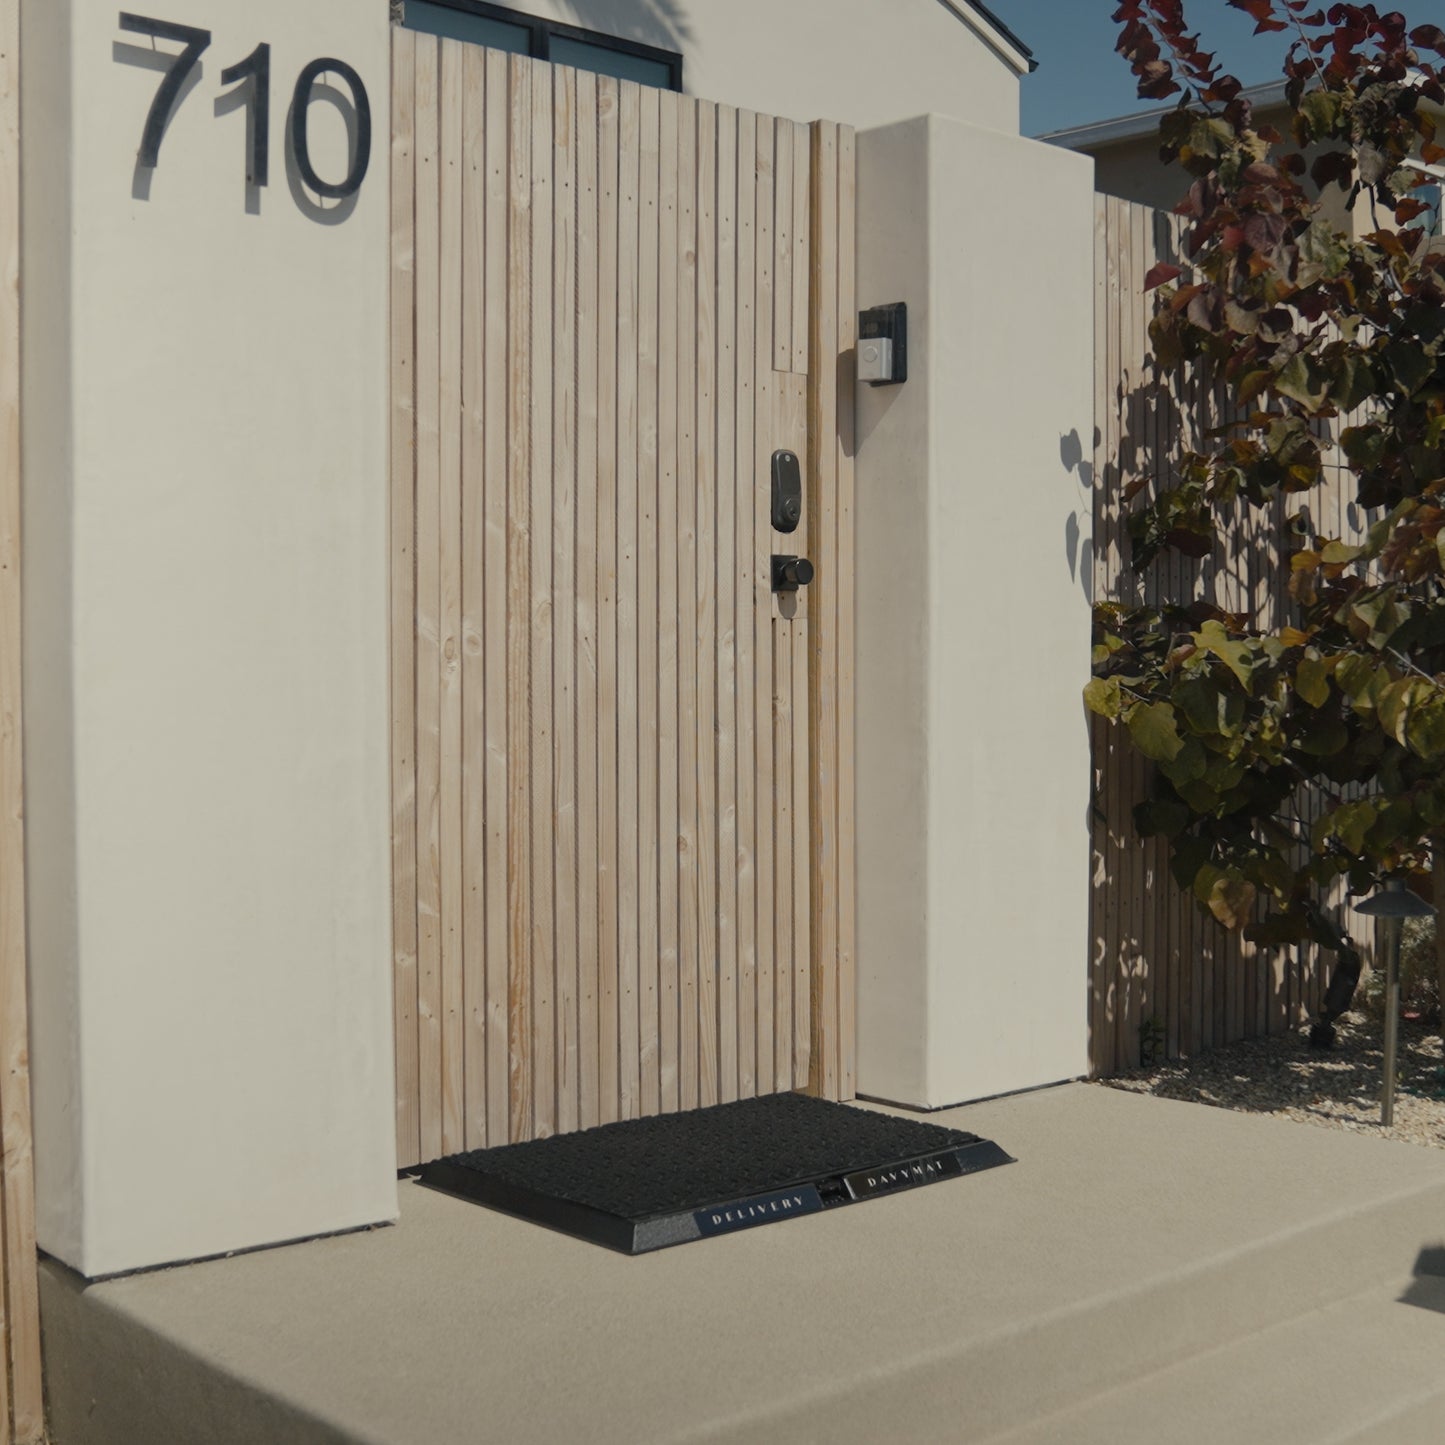 The innovative doormat that transforms to a delivery locker, preventing package theft with style, and unlocking the true freedom of online shopping.